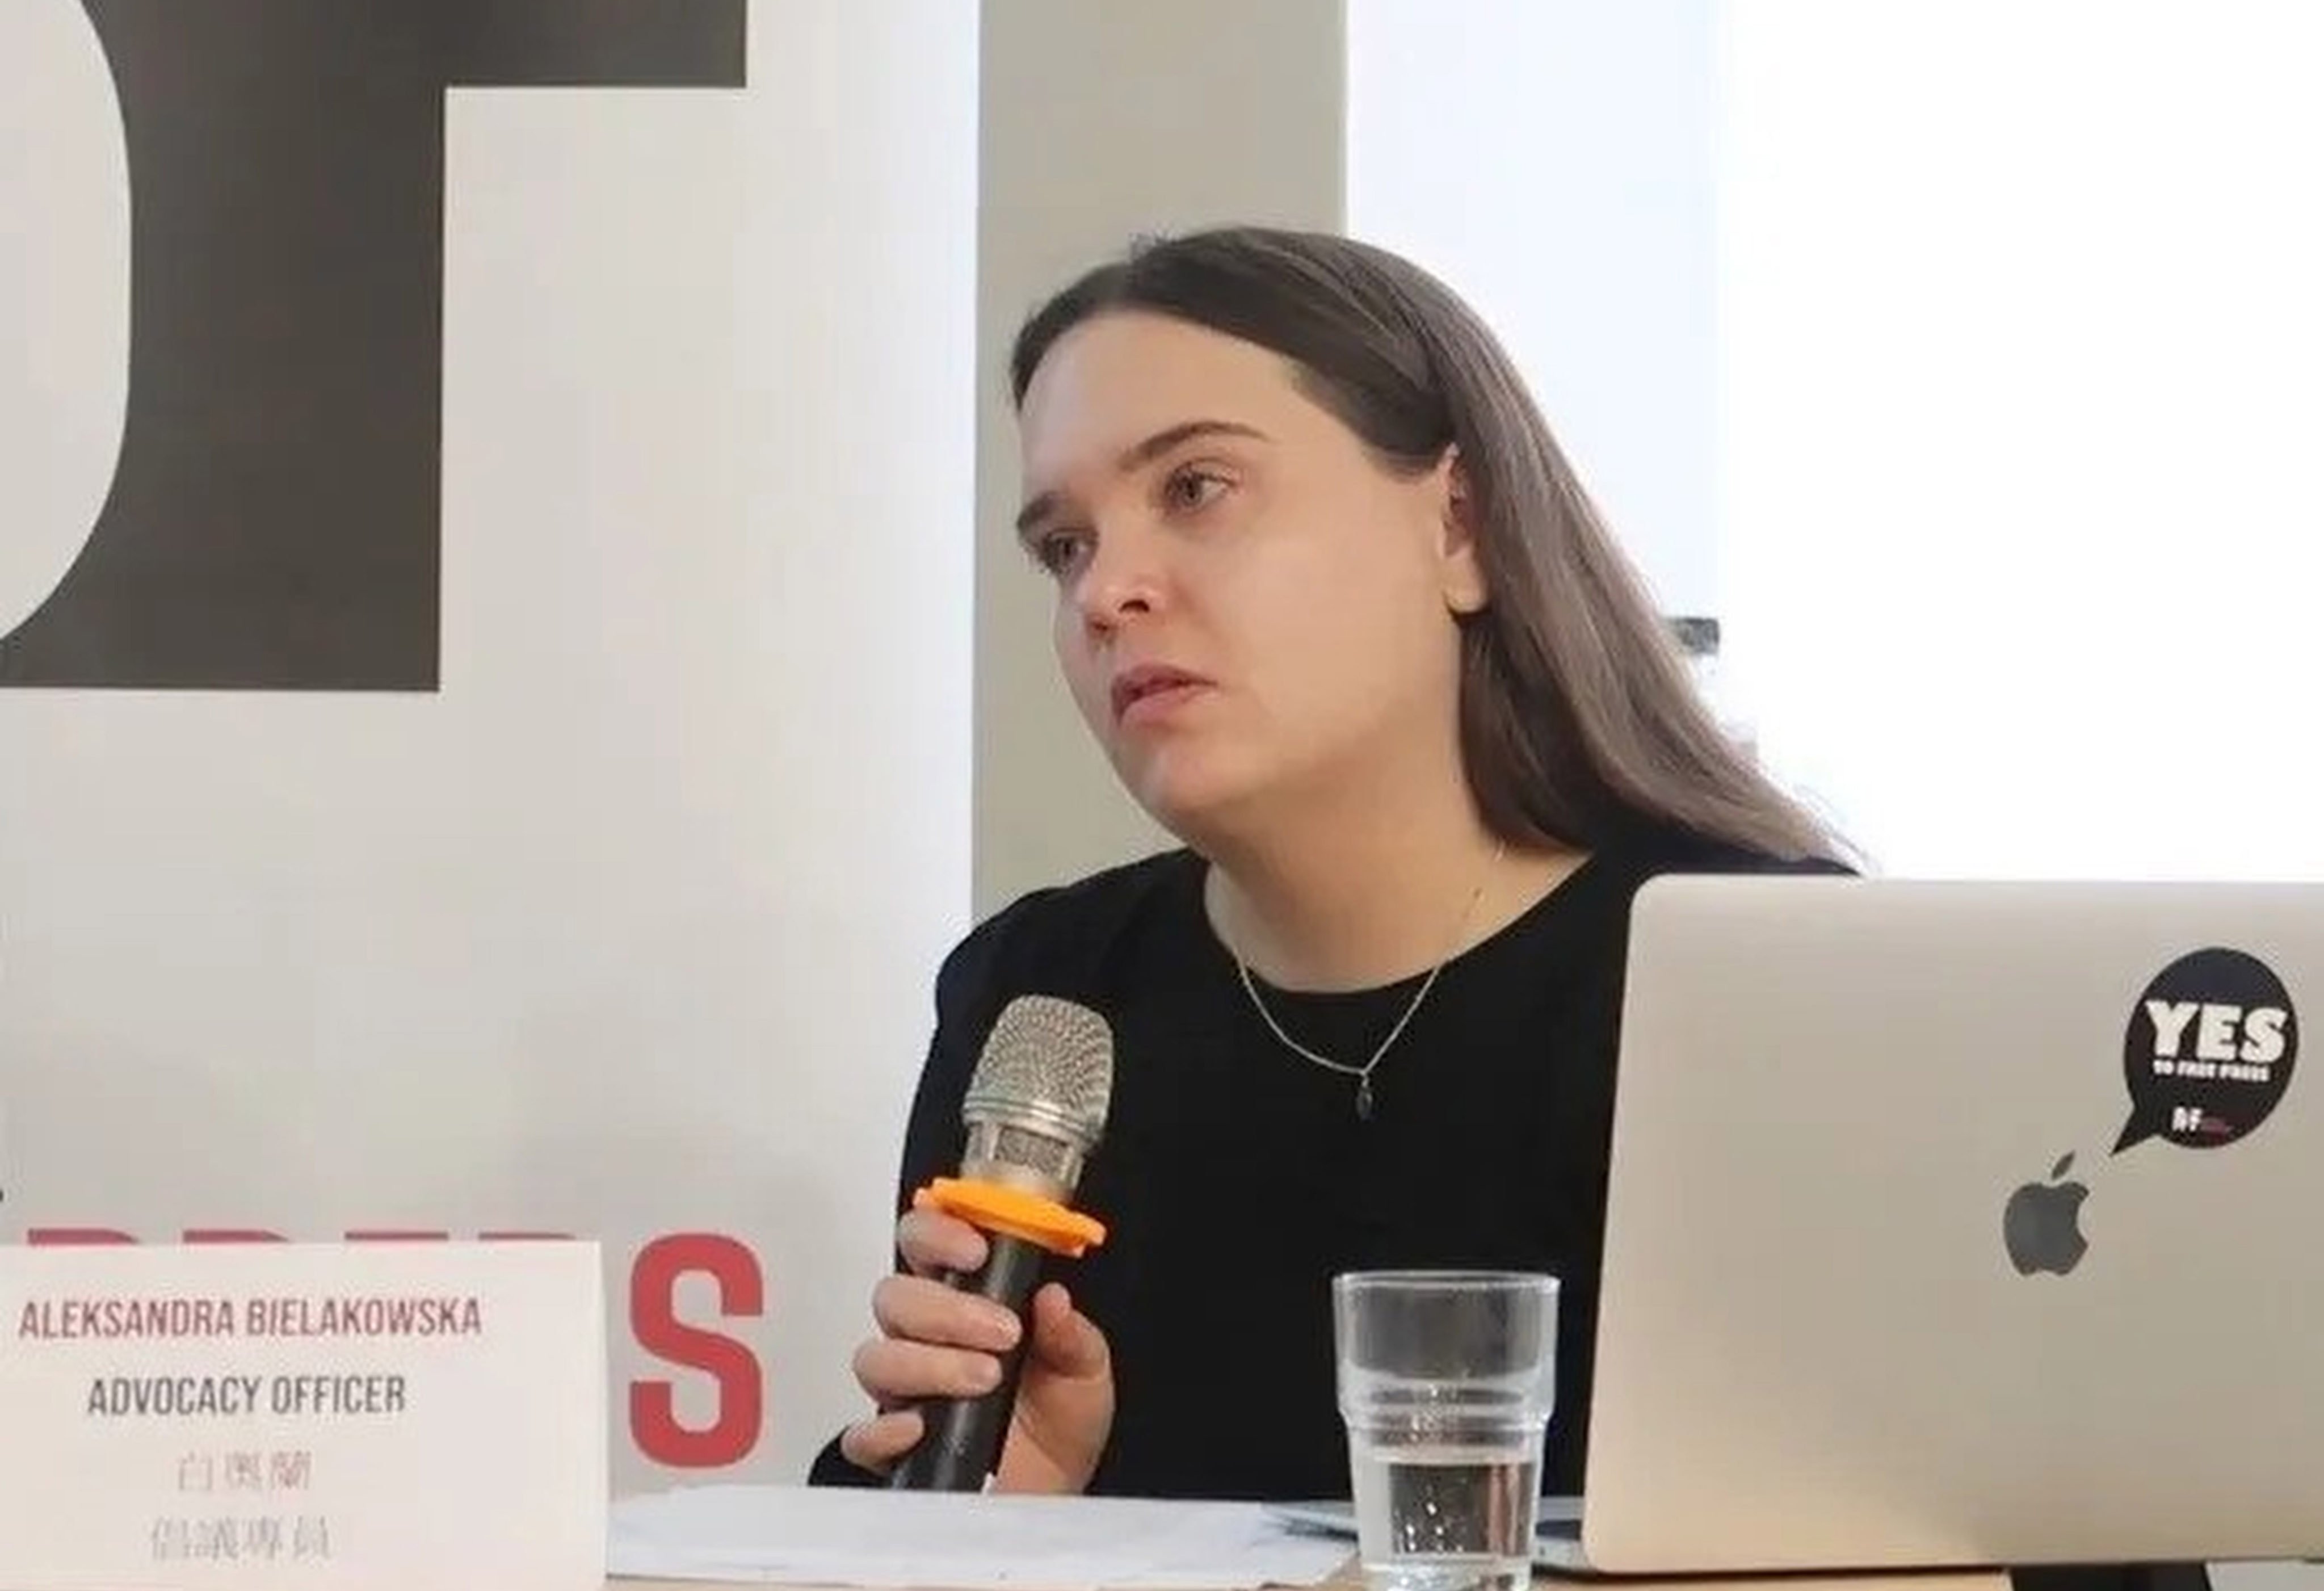 Reporters Without Borders has said advocacy officer Aleksandra Bielakowska was searched and questioned in a detention lasting six hours at the Hong Kong International Airport before she was deported. Photo: Handout